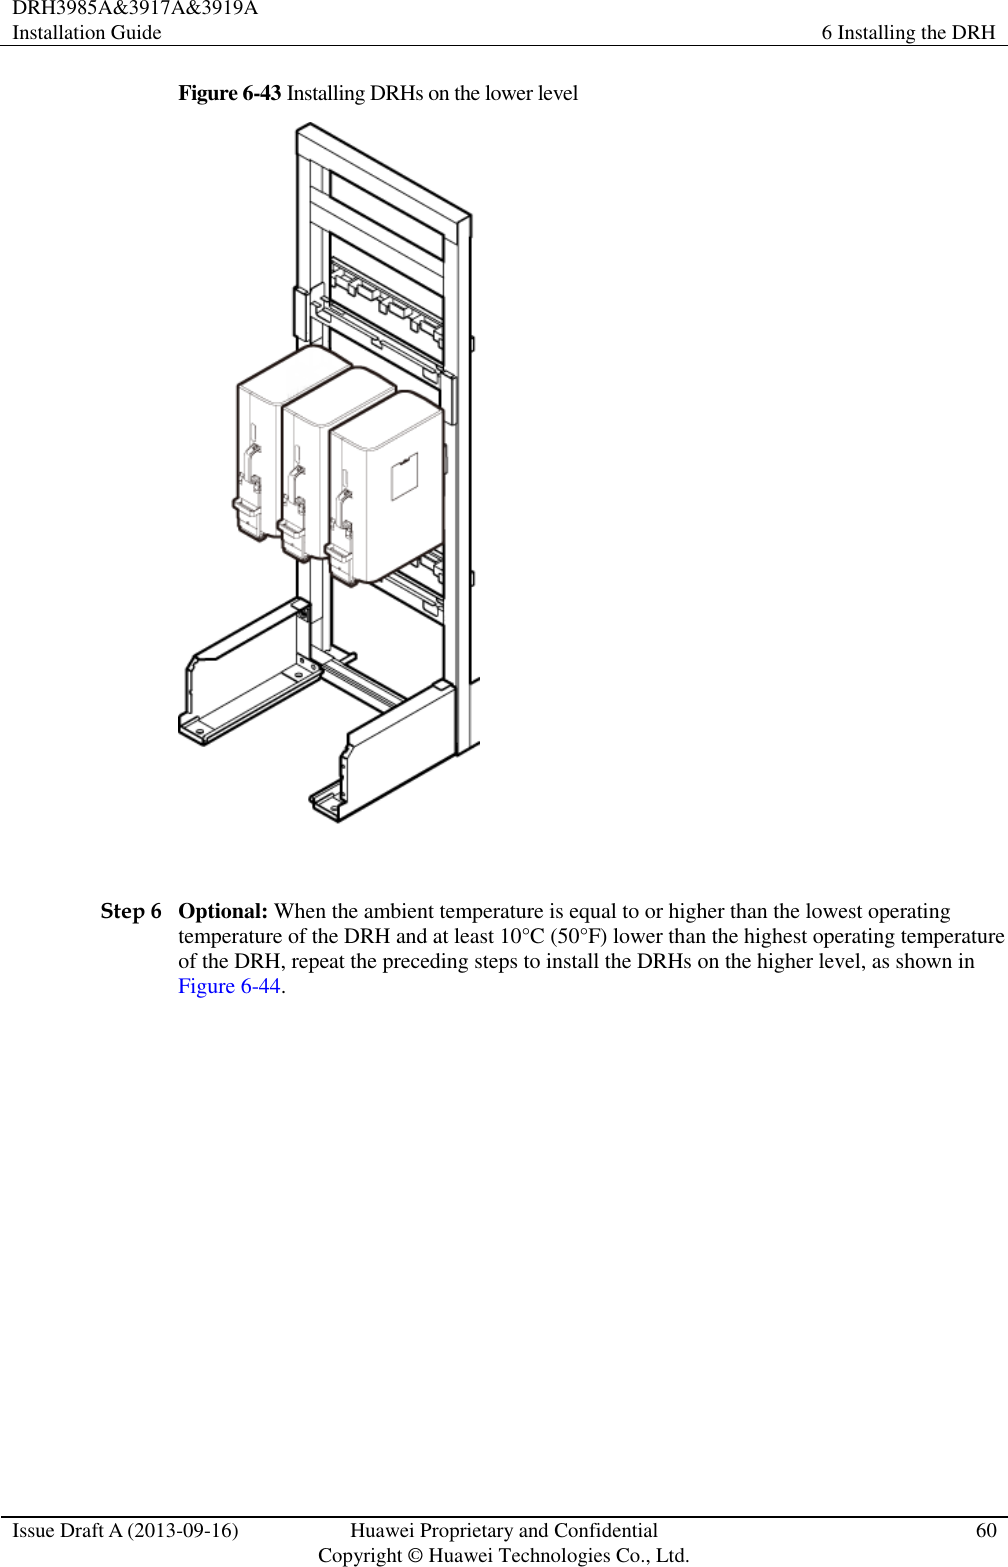 DRH3985A&amp;3917A&amp;3919A Installation Guide 6 Installing the DRH  Issue Draft A (2013-09-16) Huawei Proprietary and Confidential                                     Copyright © Huawei Technologies Co., Ltd. 60  Figure 6-43 Installing DRHs on the lower level   Step 6 Optional: When the ambient temperature is equal to or higher than the lowest operating temperature of the DRH and at least 10°C (50°F) lower than the highest operating temperature of the DRH, repeat the preceding steps to install the DRHs on the higher level, as shown in Figure 6-44. 